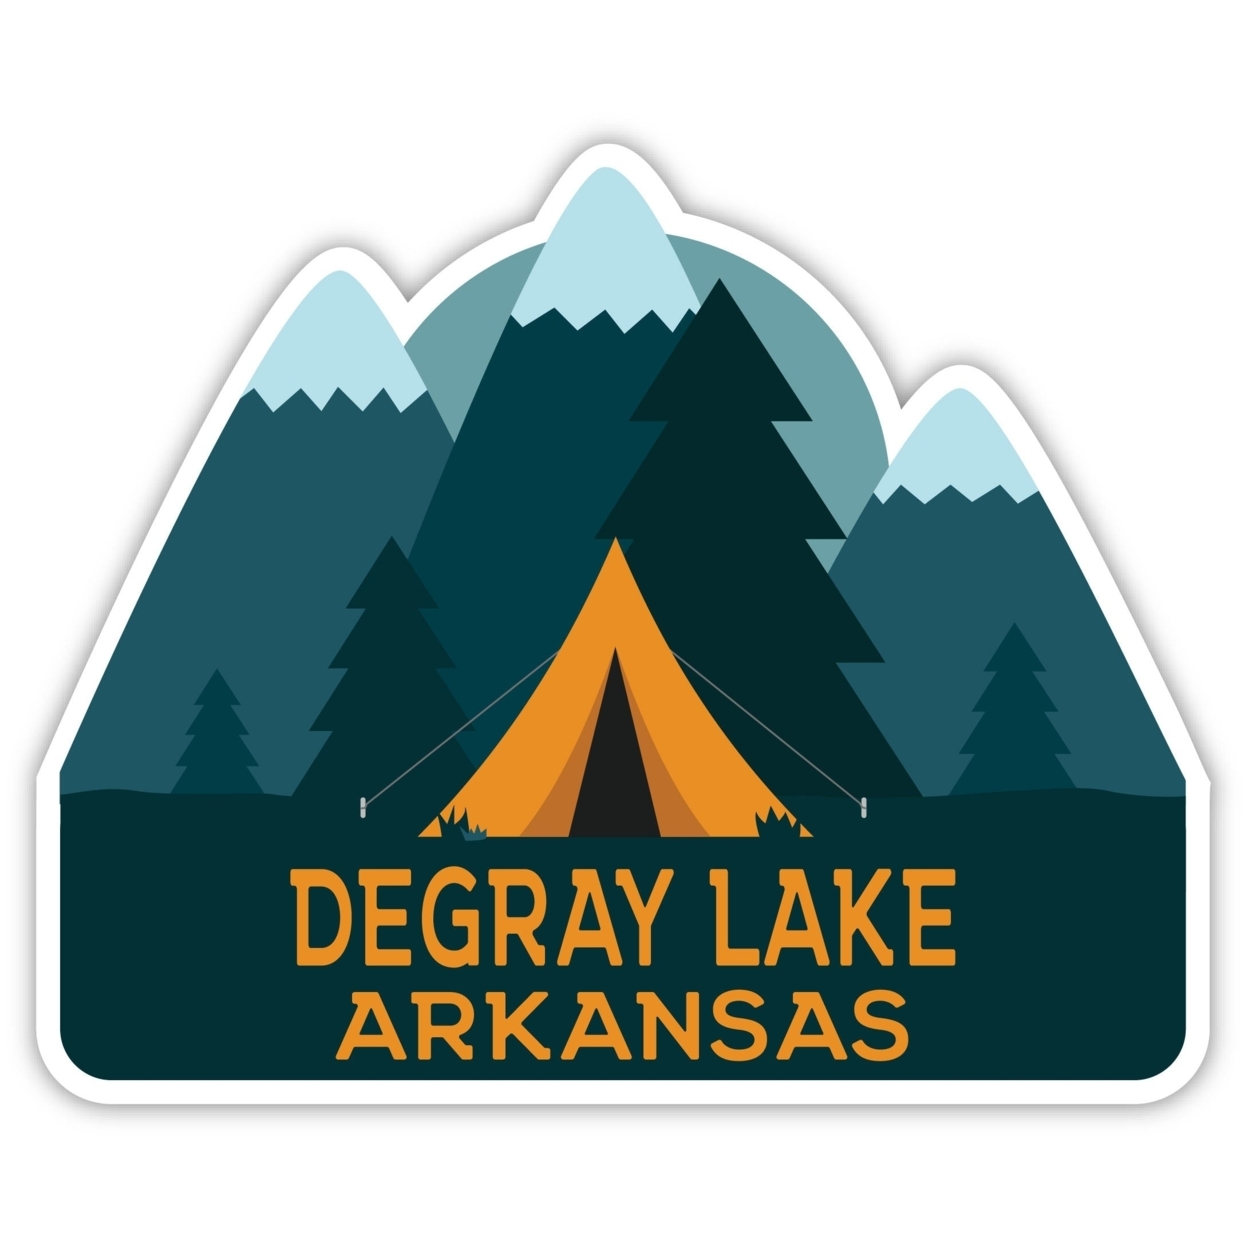 DeGray Lake Arkansas Souvenir Decorative Stickers (Choose Theme And Size) - 4-Pack, 6-Inch, Tent